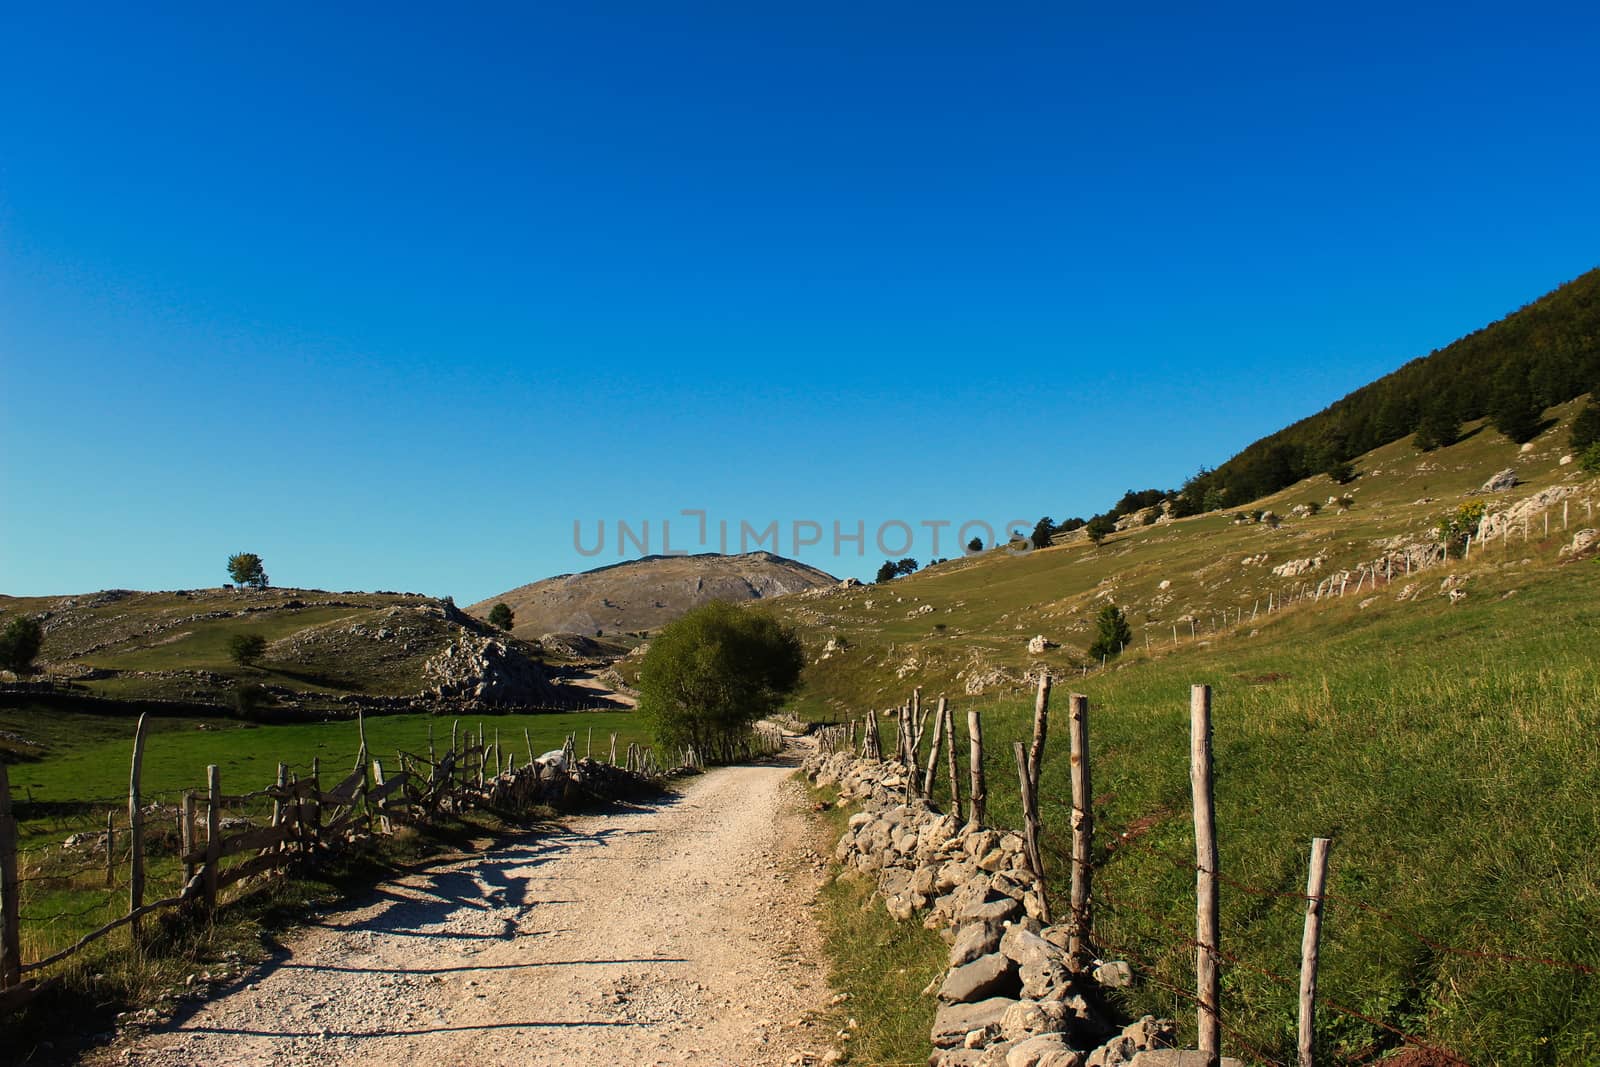 Mountain road that leads to the old Bosnian village of Lukomir. The road is surrounded by stone with wooden pillars connected by barbed wire. by mahirrov